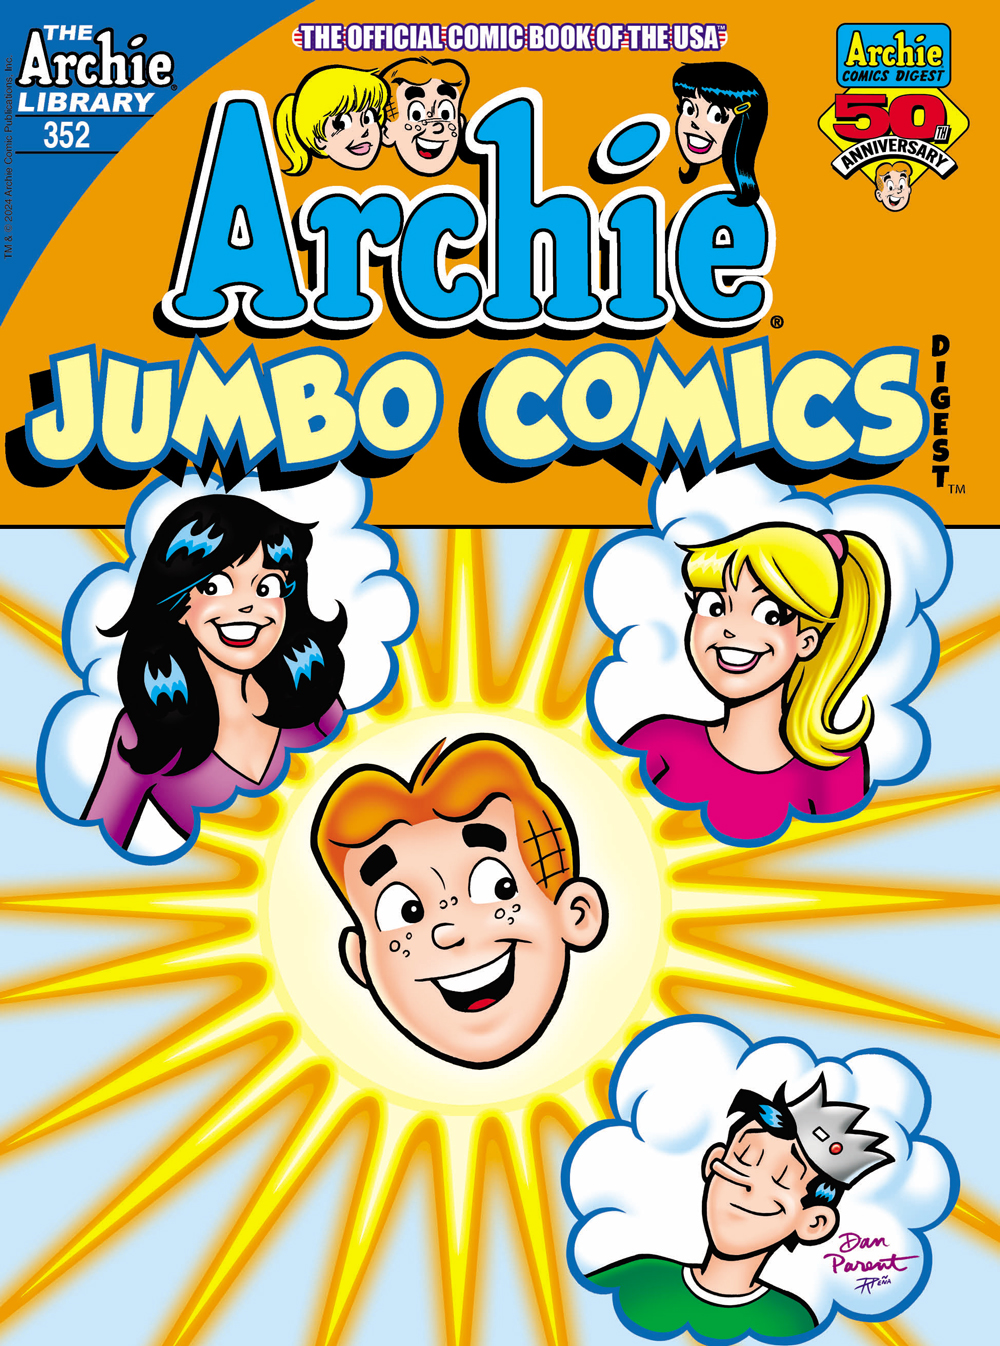 A floating head of Archie is in the center of the frame, surrounded by a burst of light. He's surrounded by images of Veronica, Betty, and Jughead floating in thought balloons.